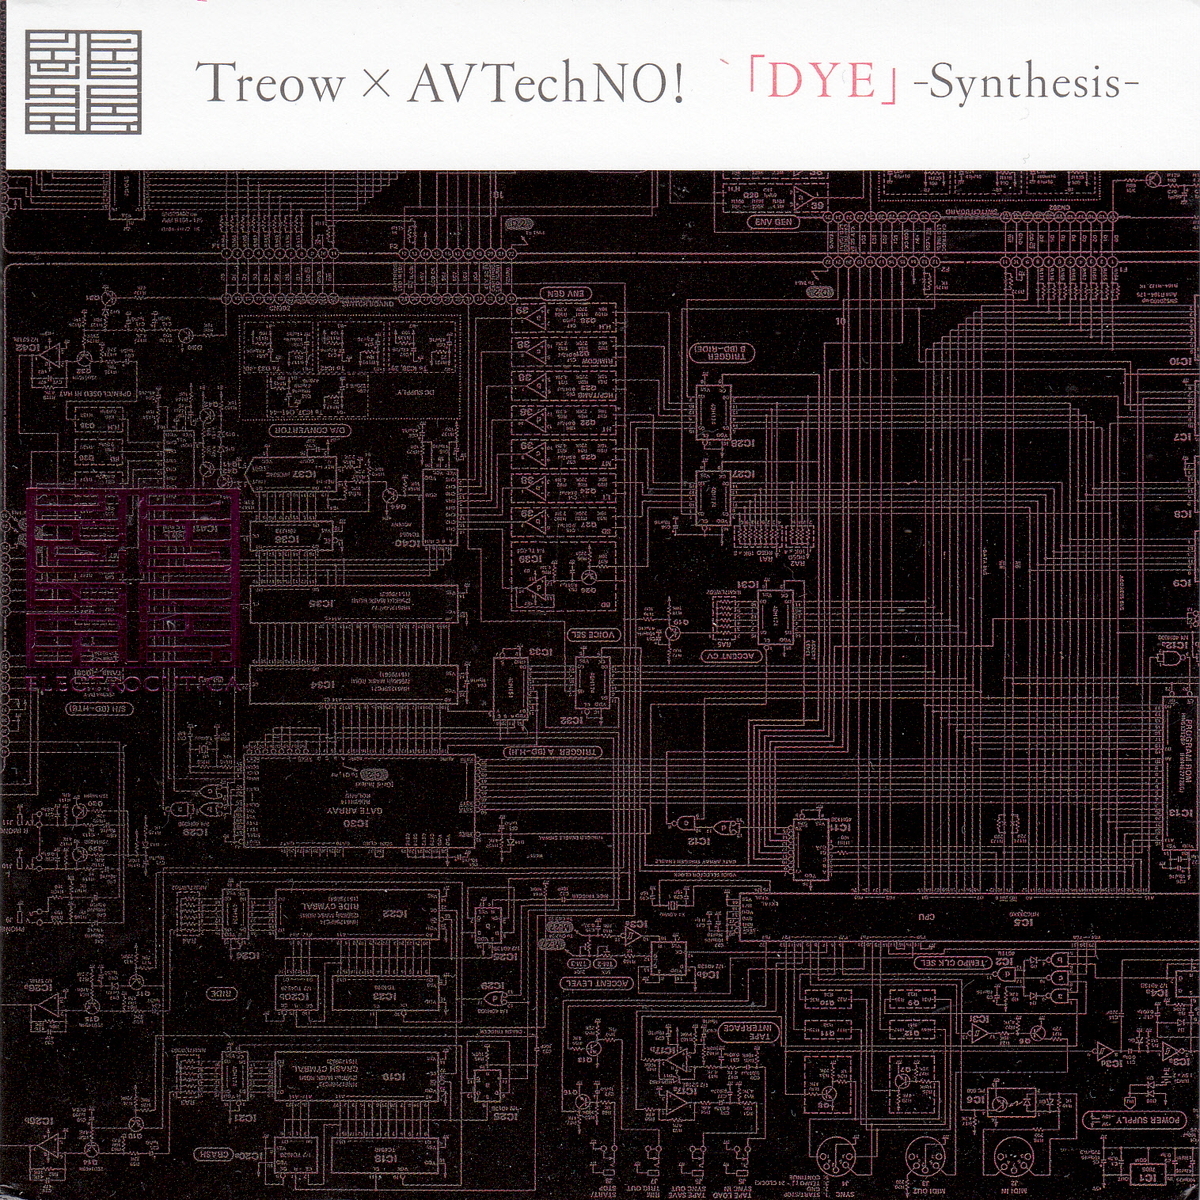 ★Treow(逆衝動P) × AVTechNO!：DYE Synthesis/ELECTROCUTICA,ボカロ,ボーカロイド,Vocaloid,初音ミク,巡音ルカ,同人音楽_画像1